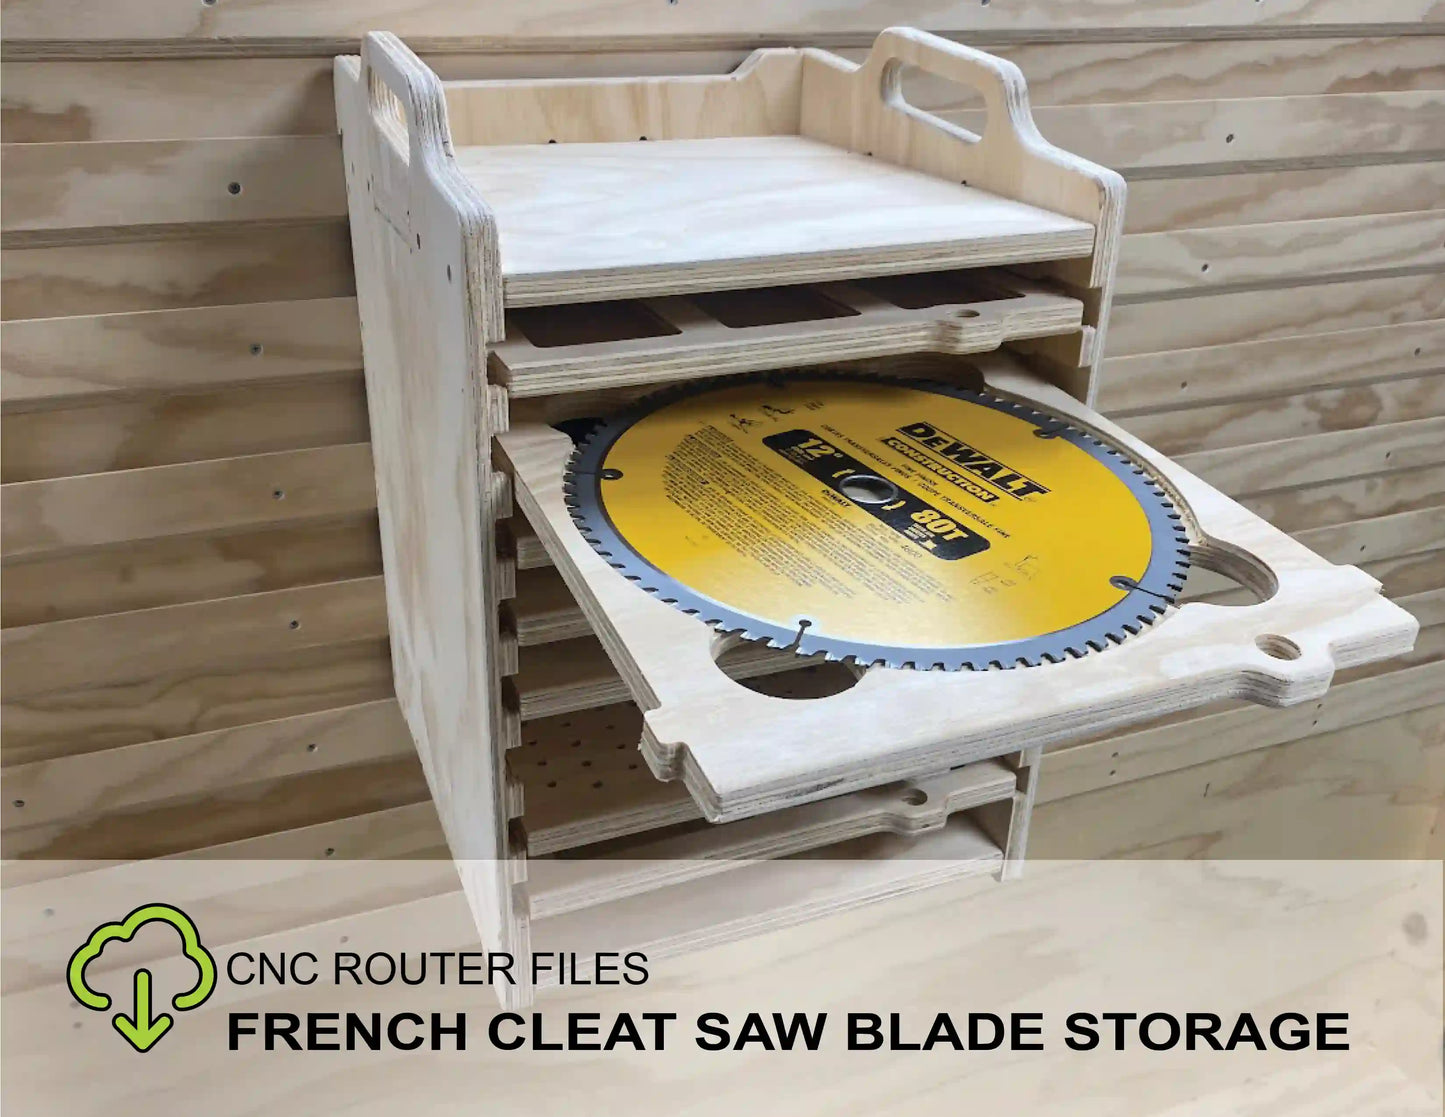 CNC Router Files French Cleat Saw Blade Holder